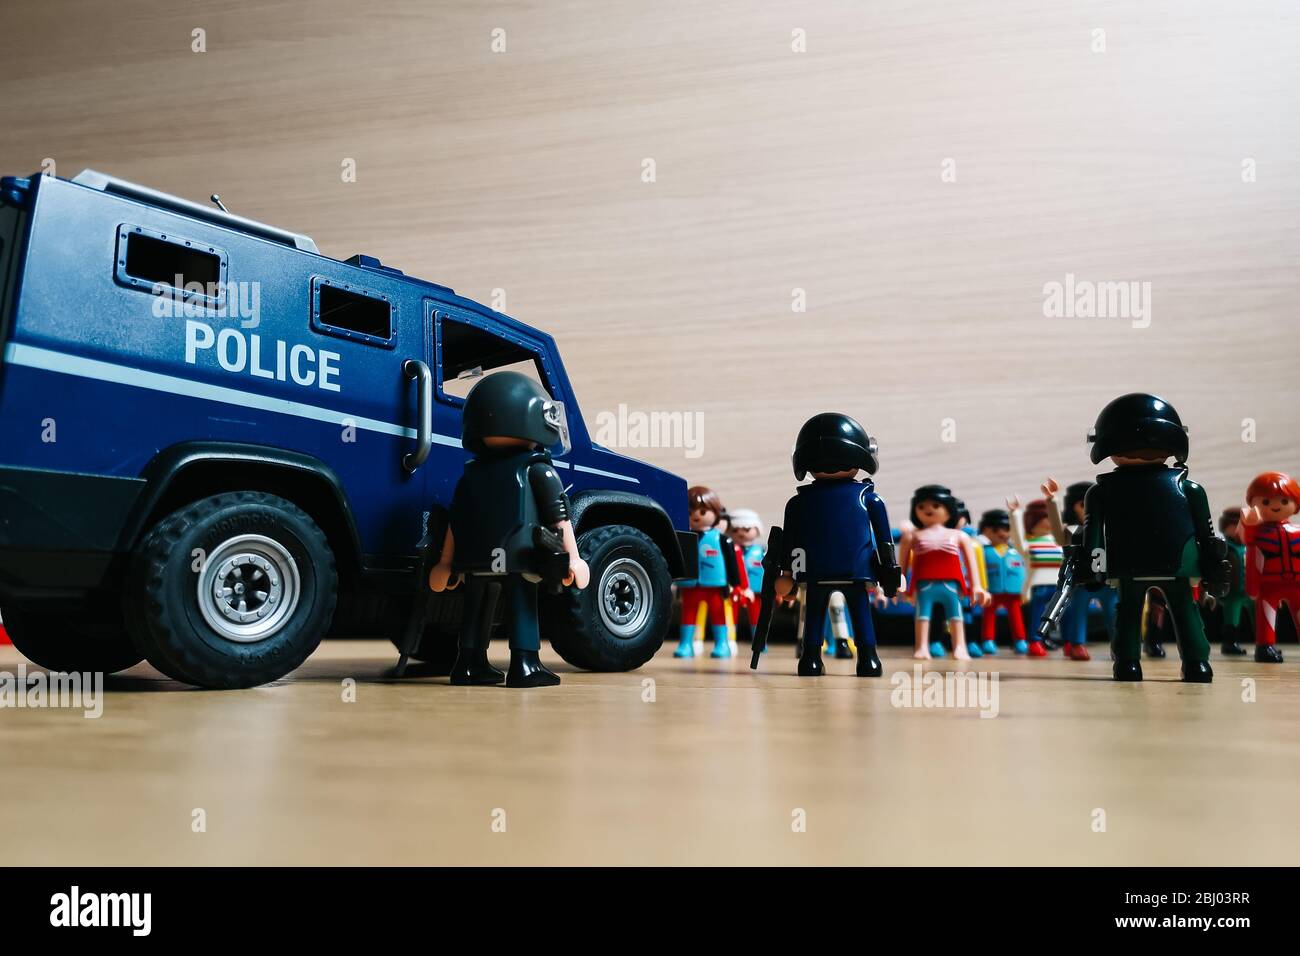 Madrid, Spain - July 13, 2019: Playmobil figurines in scene representing  antiriot police standing against protesters Stock Photo - Alamy